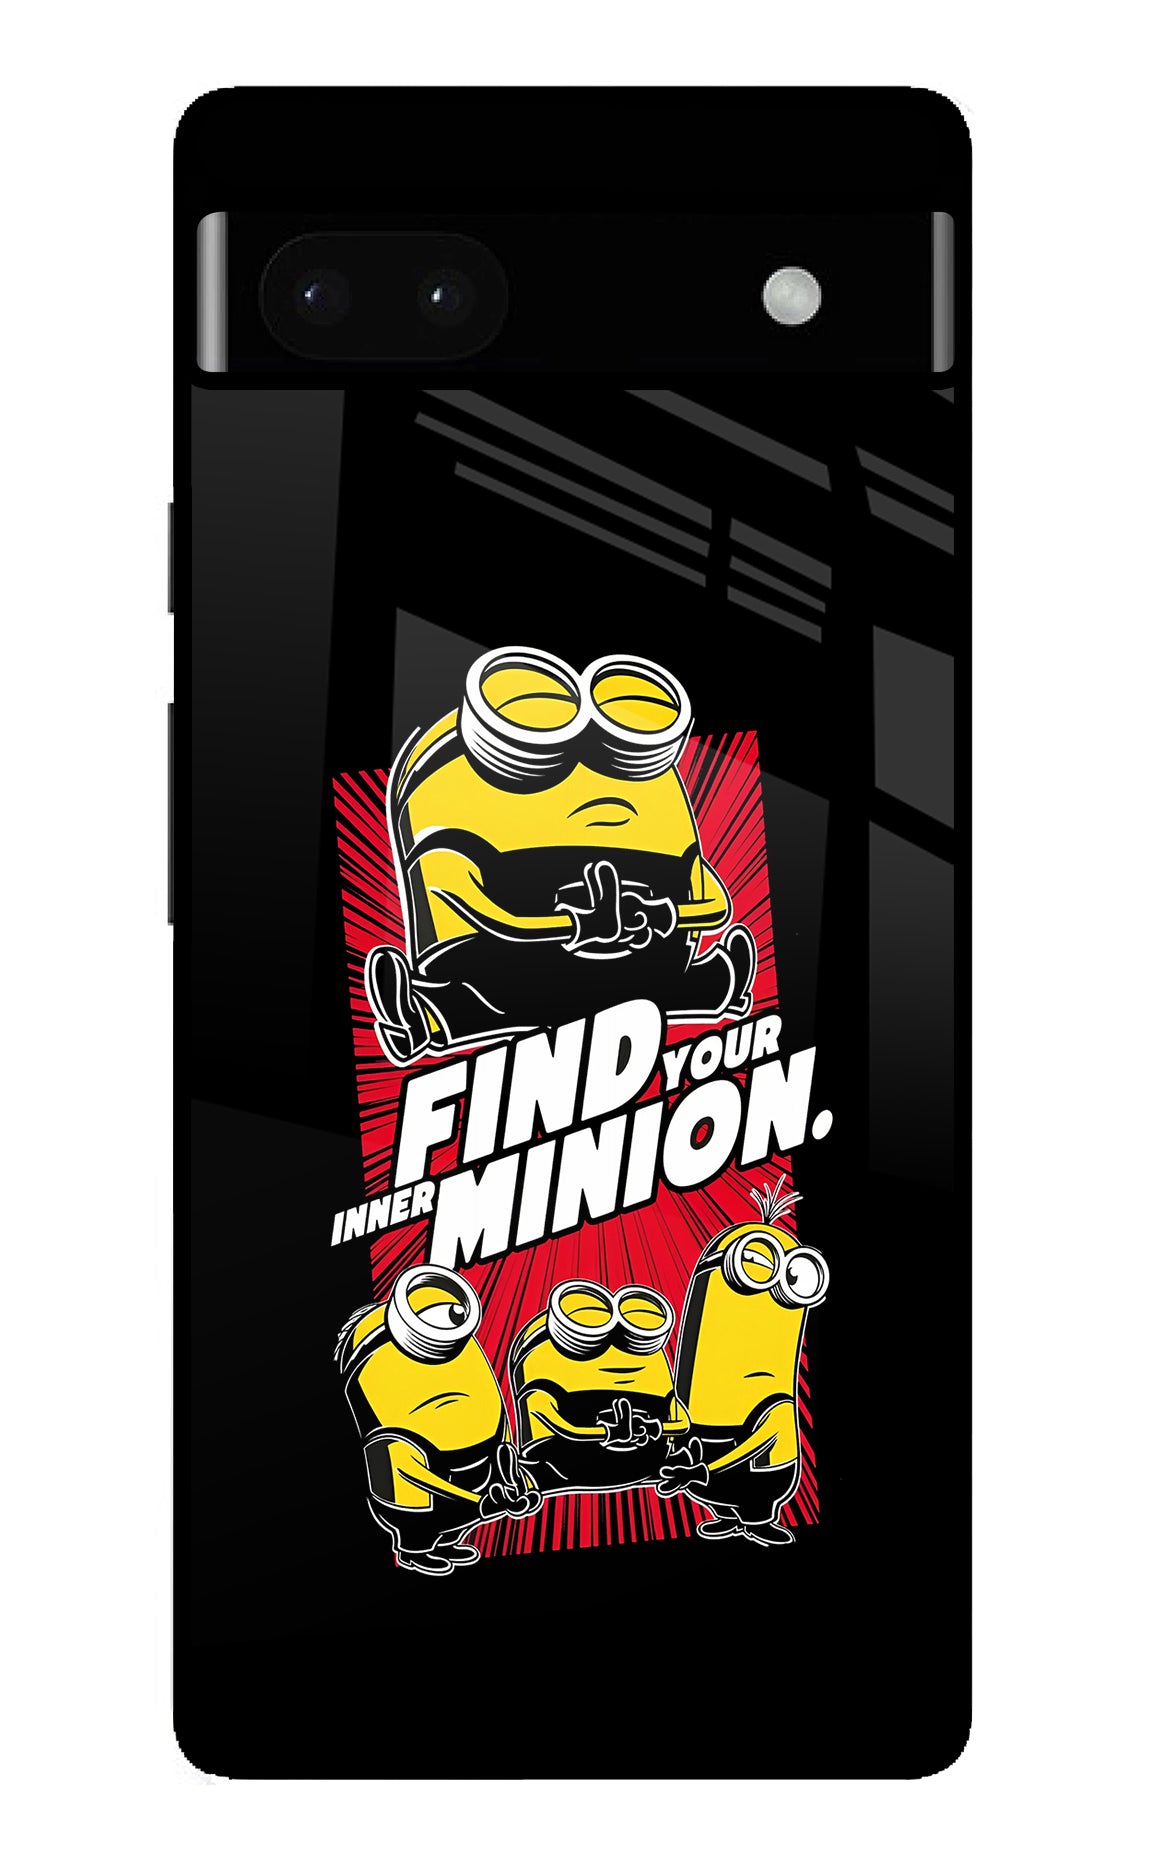 Find your inner Minion Google Pixel 6A Back Cover